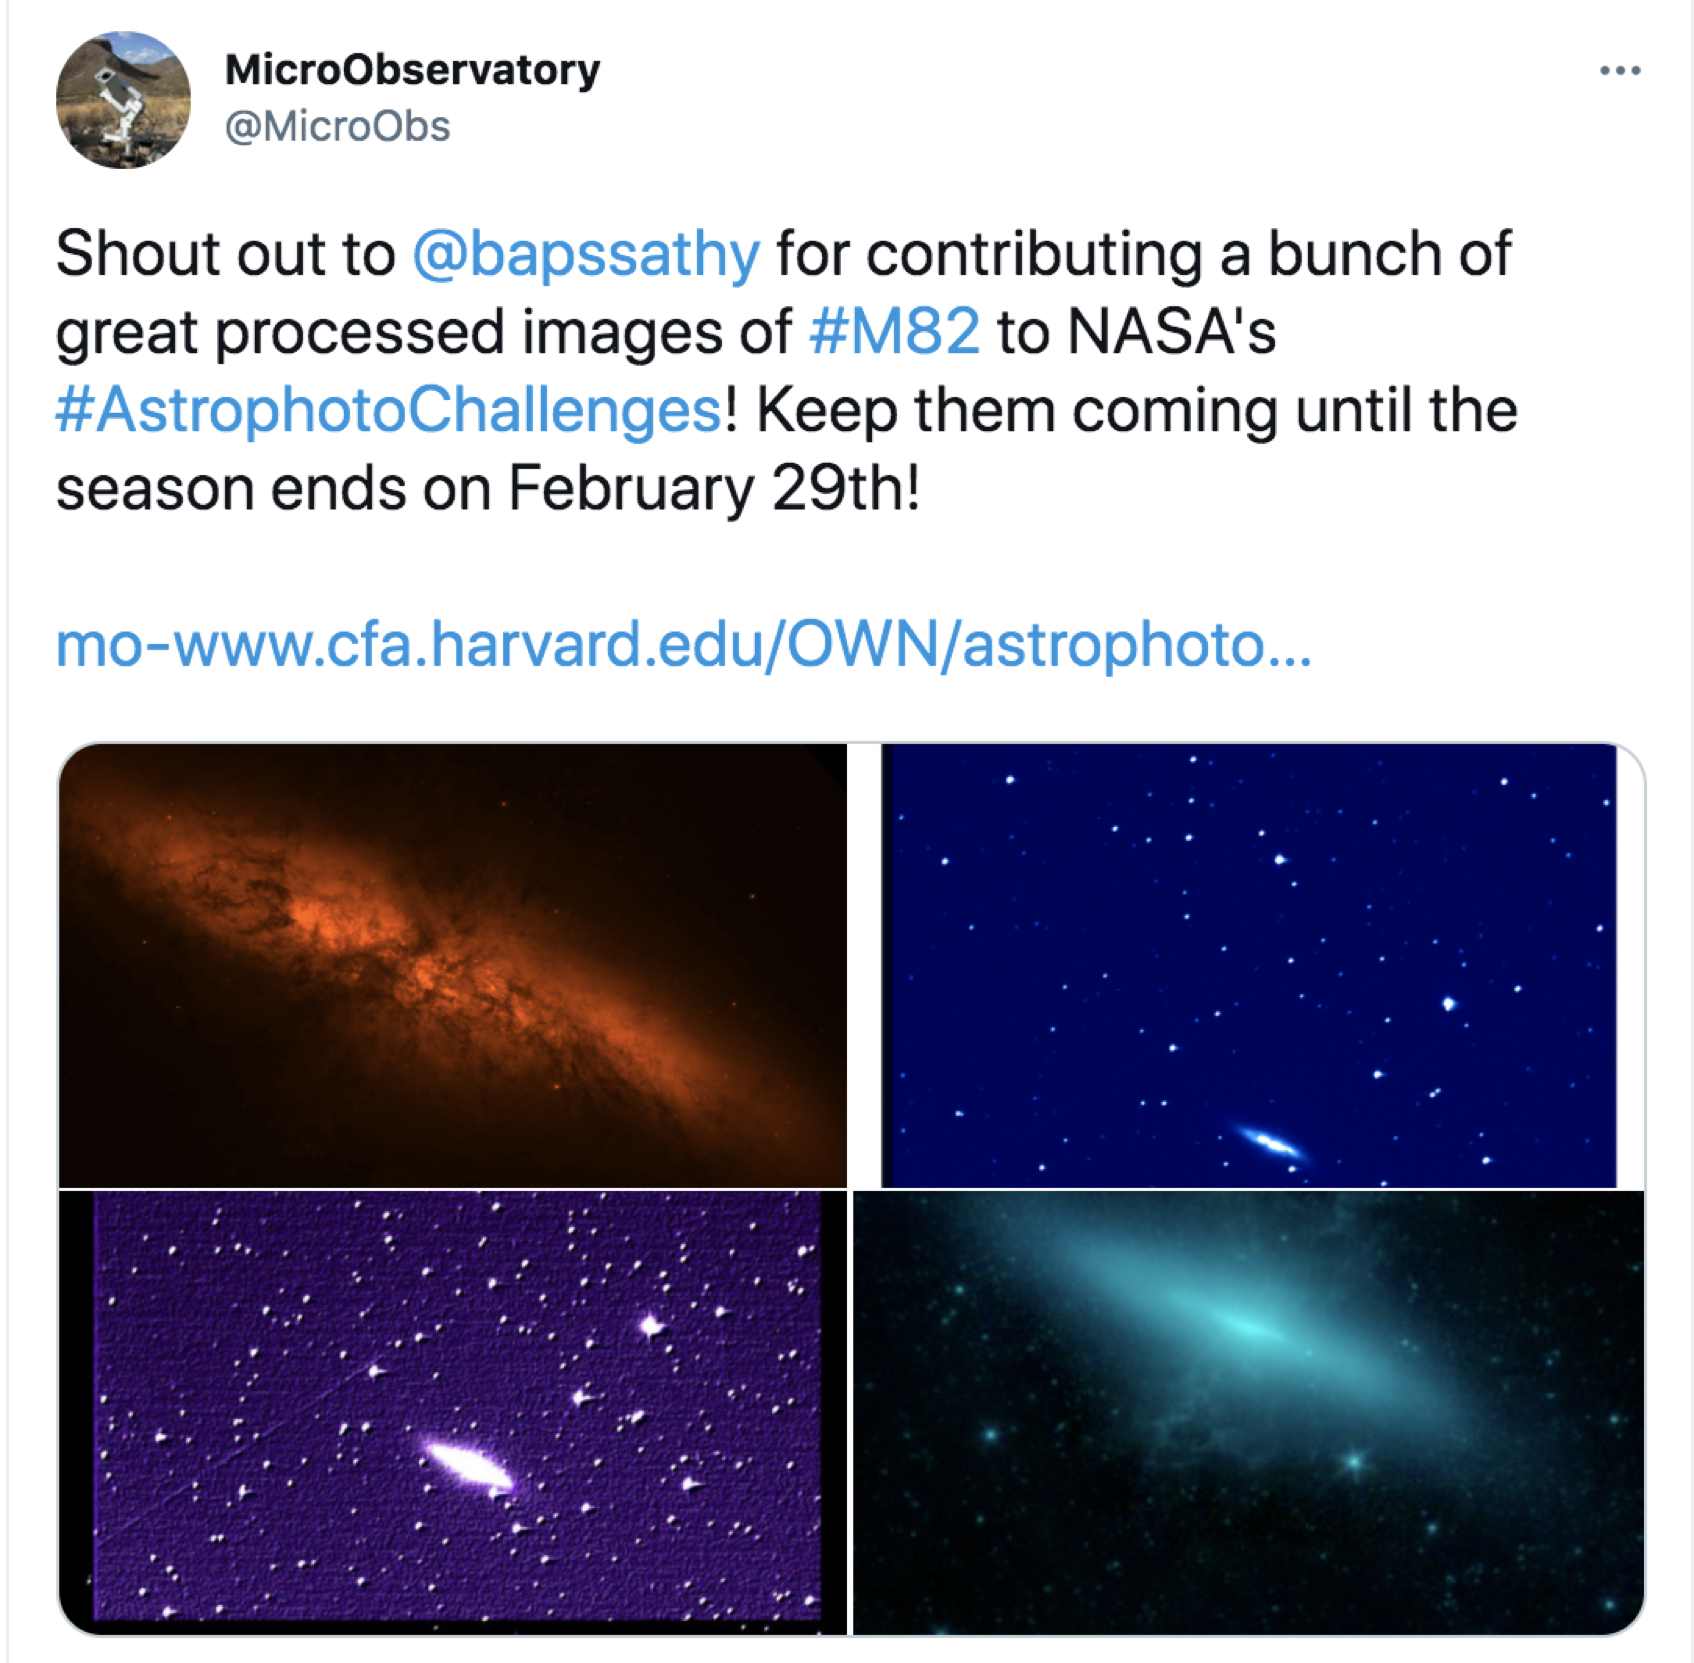 Submit your images to the MicroObservatory Challenge with this form